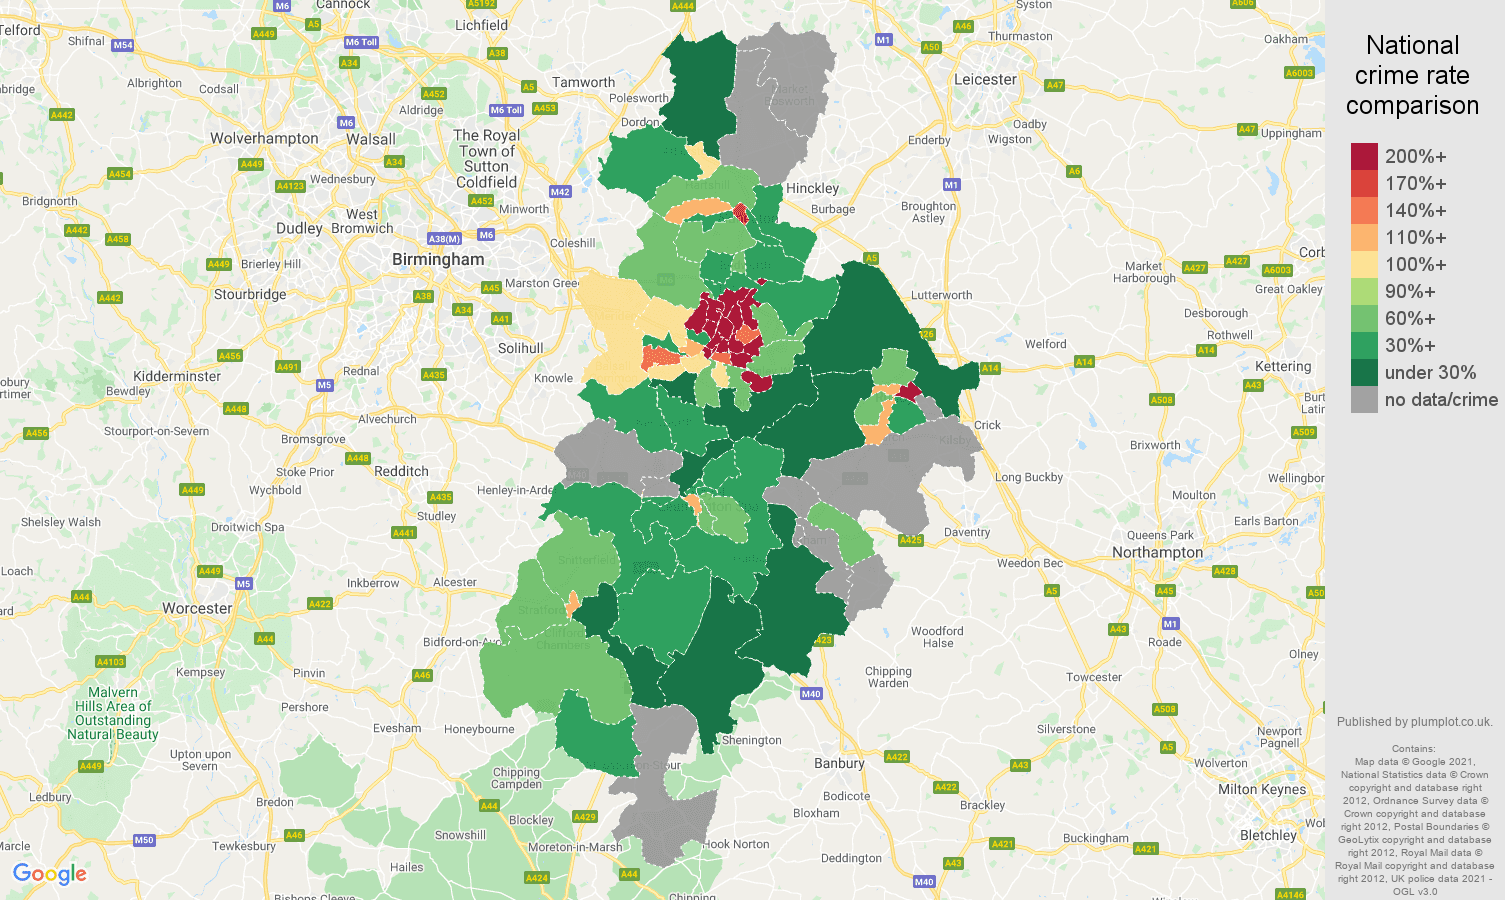 Coventry robbery crime rate comparison map